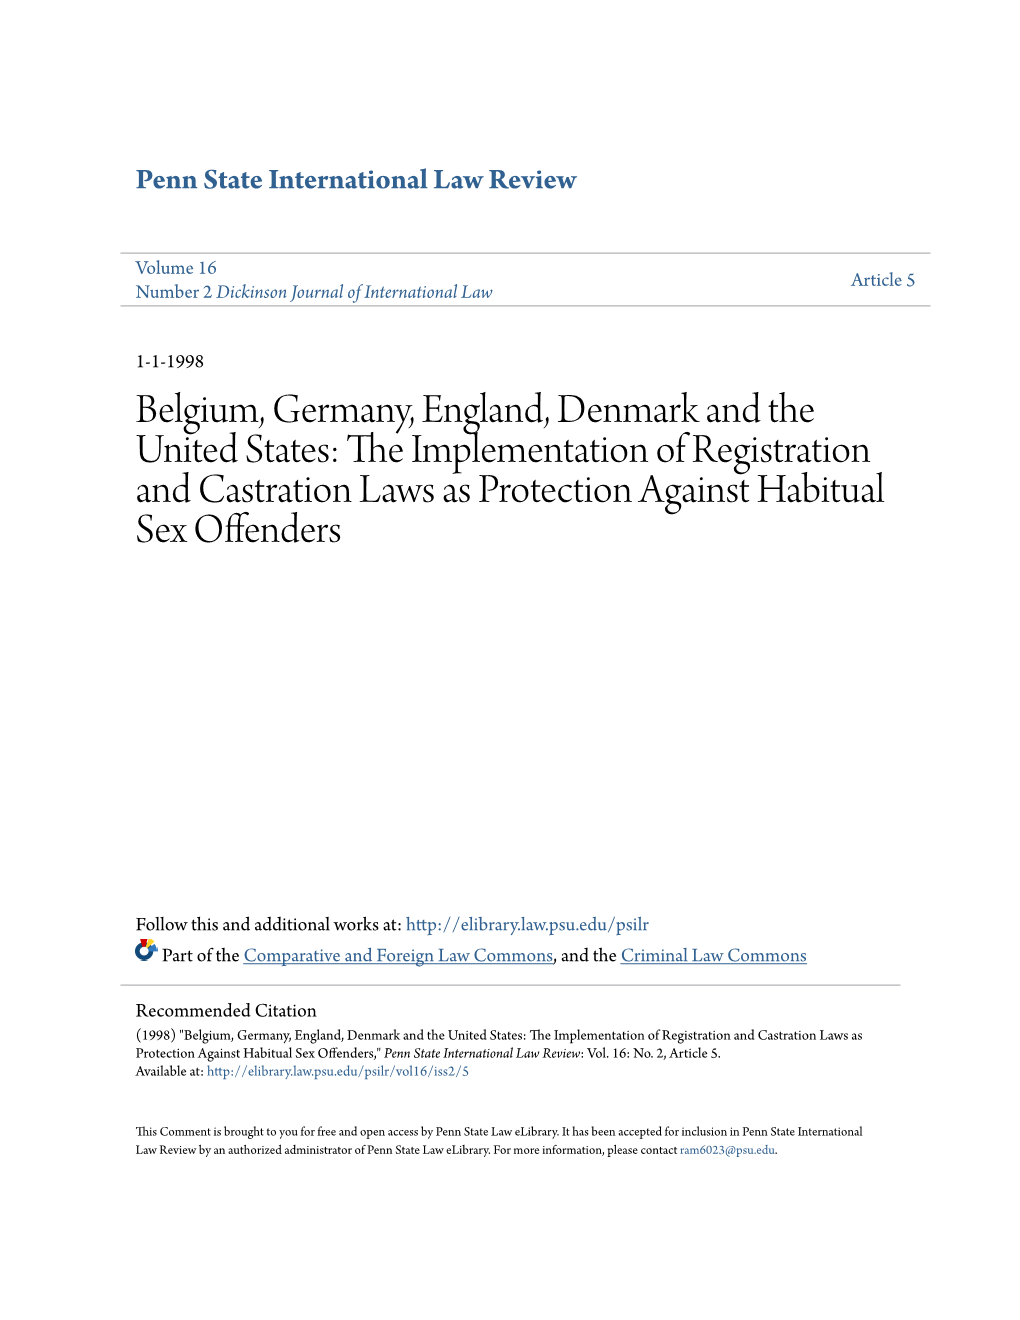 Belgium, Germany, England, Denmark and the United States: the Mplei Mentation of Registration and Castration Laws As Protection Against Habitual Sex Offenders